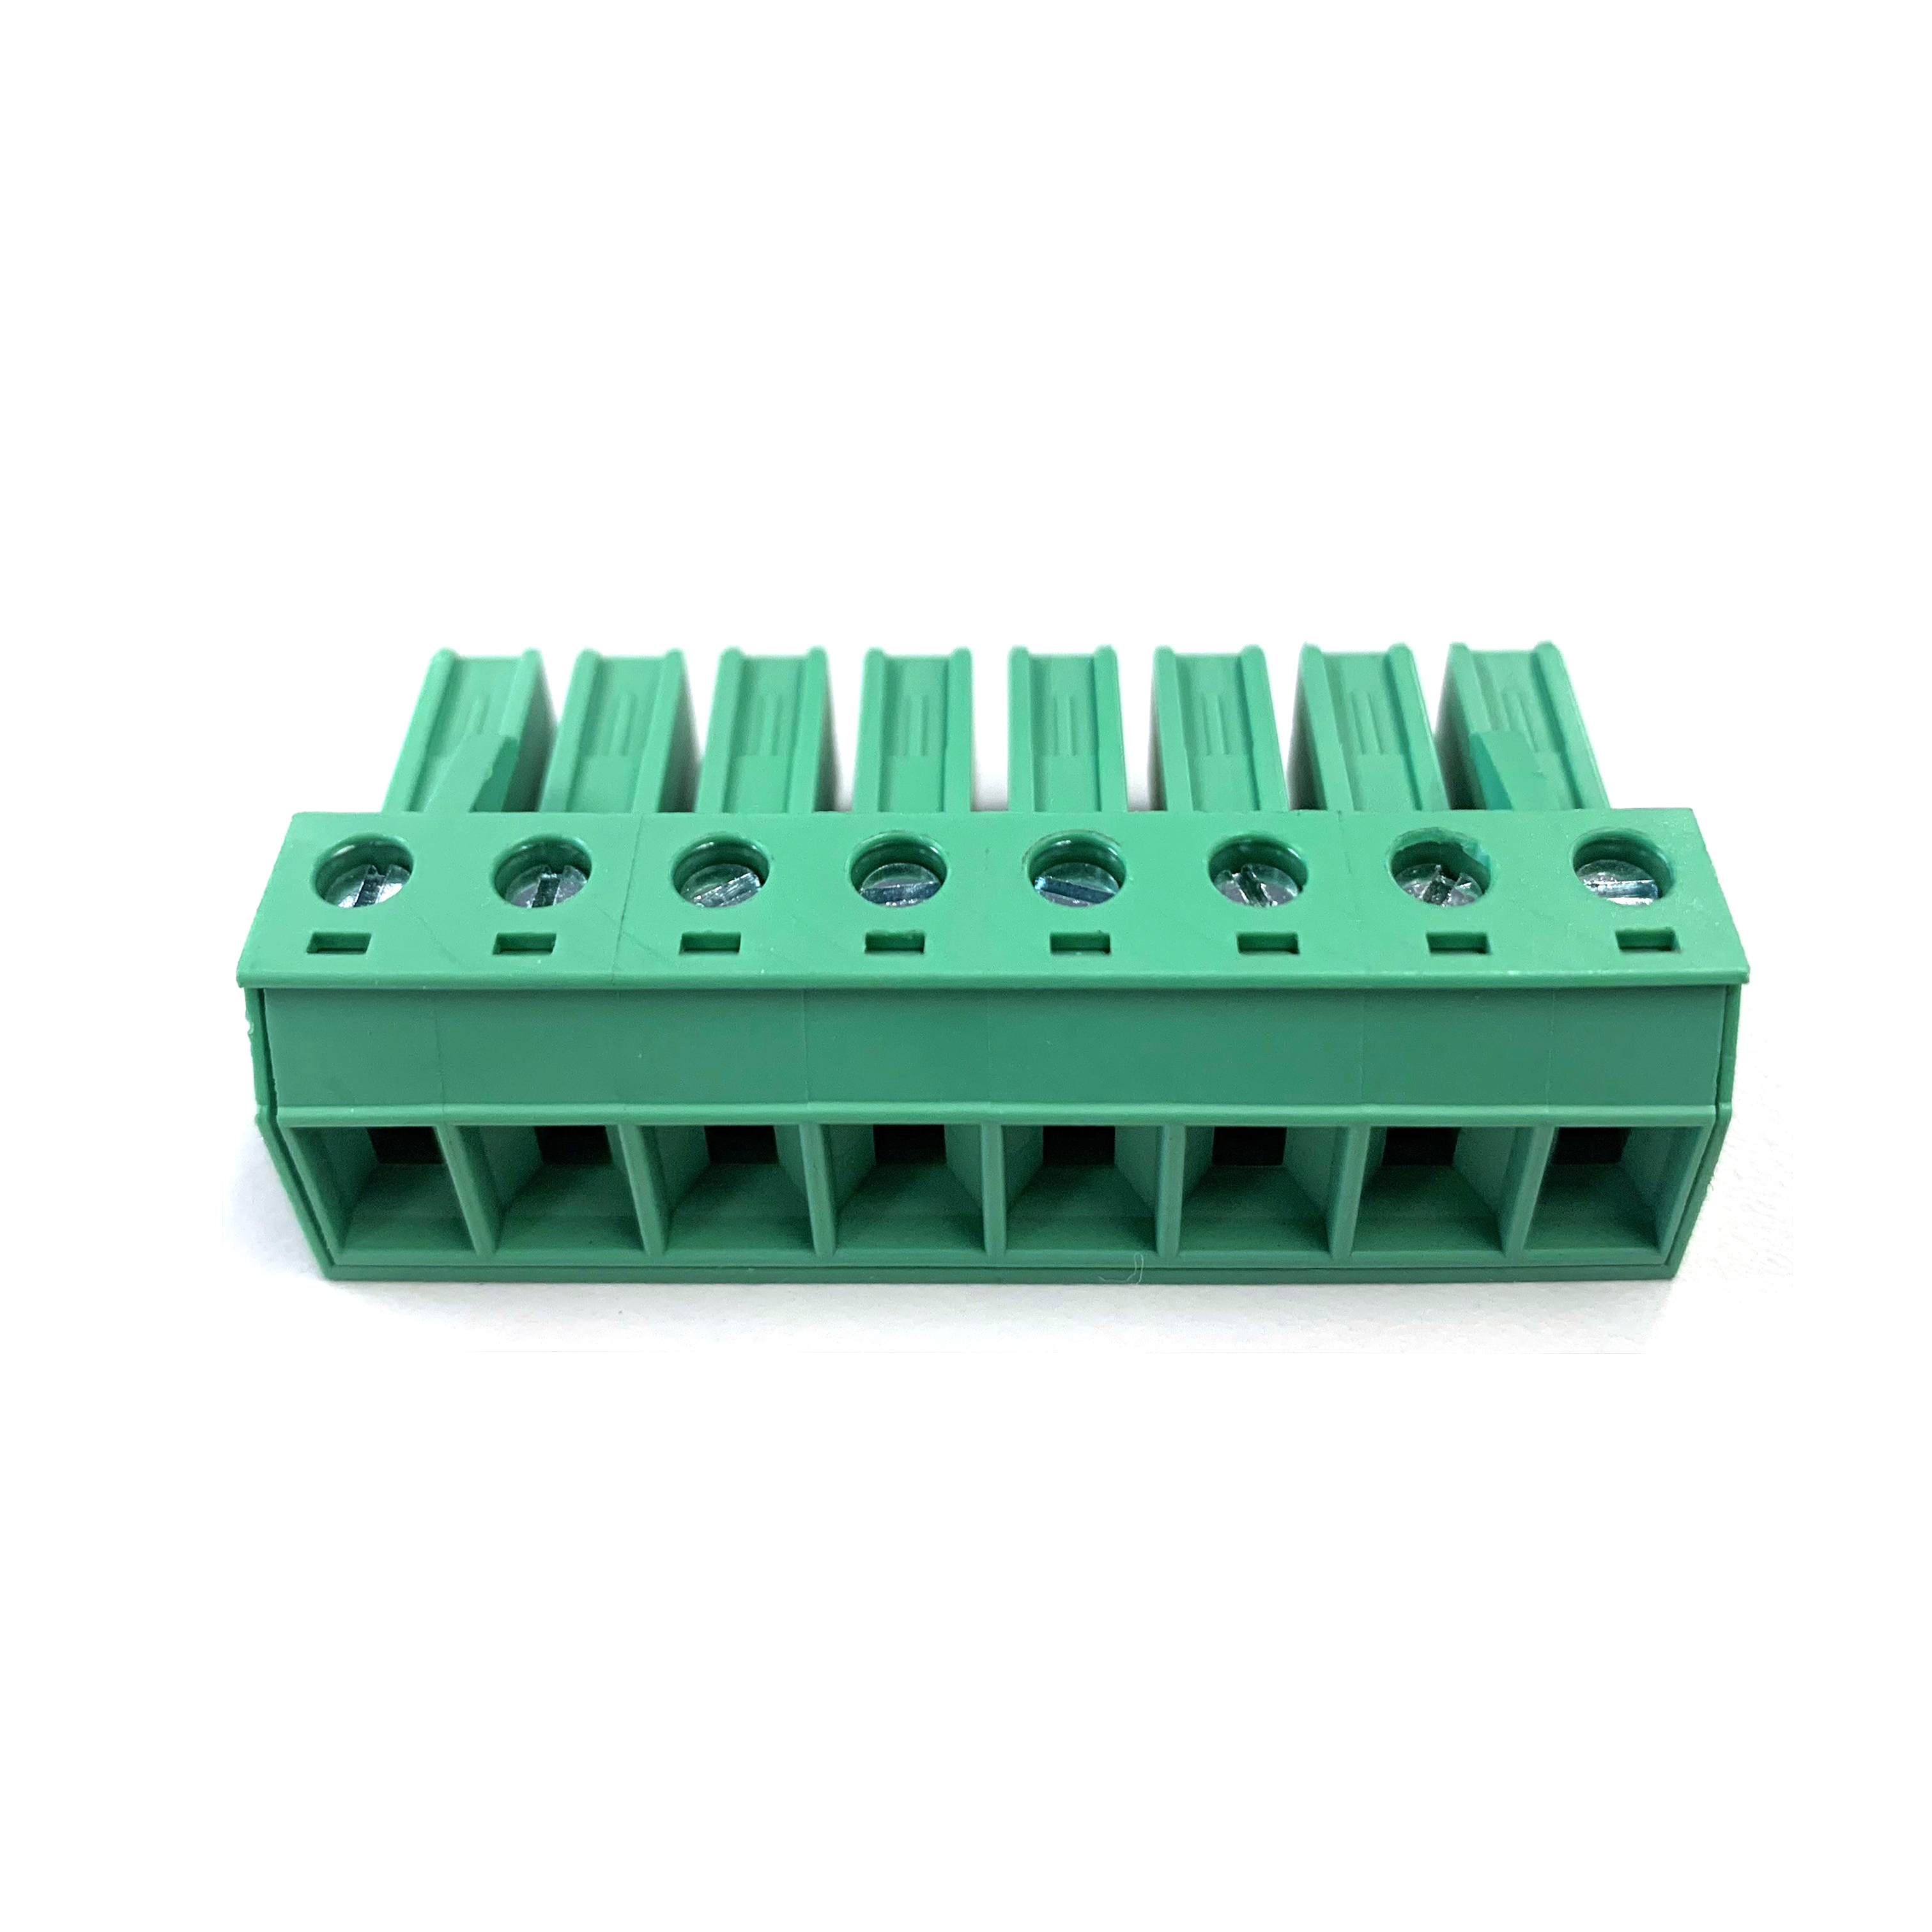 6614 terminal block connector 8-pin male for 5811